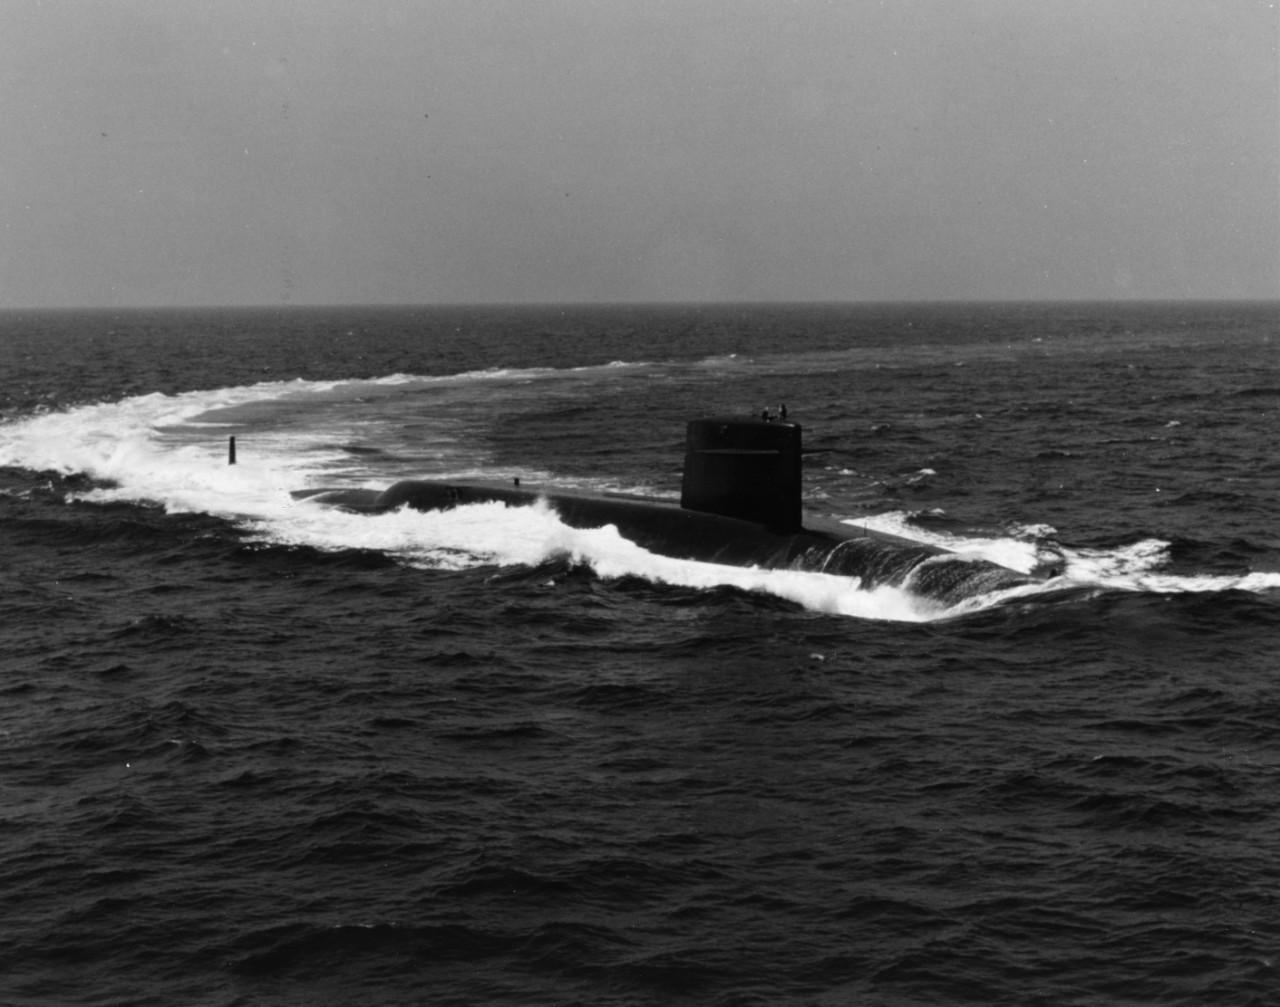 Starboard bow view of nuclear powered ballistic missile submarine USS Woodrow Wilson (SSBN-624) underway on the surface off the coast of South Carolina